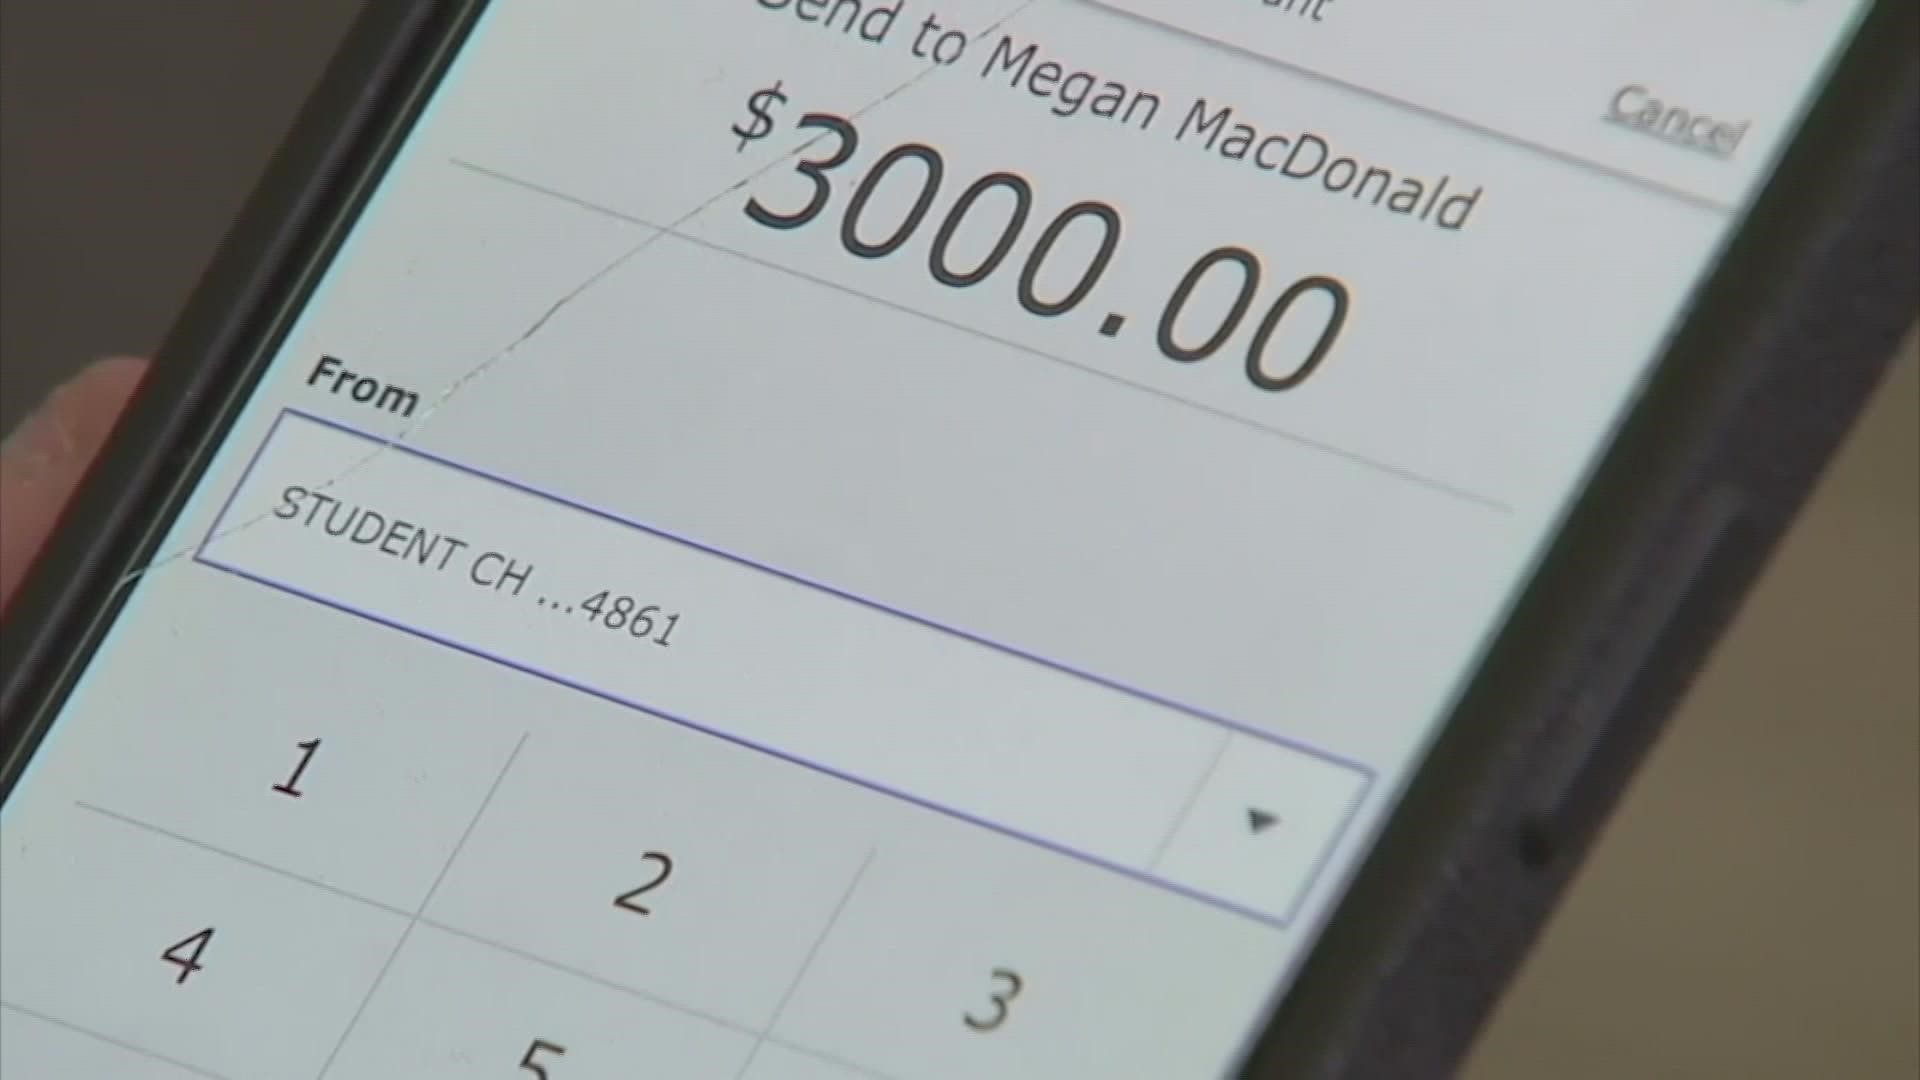 More and more people are losing thousands of dollars to scams involving the money transfer app Zelle. Experts share tips on how to avoid becoming a victim.